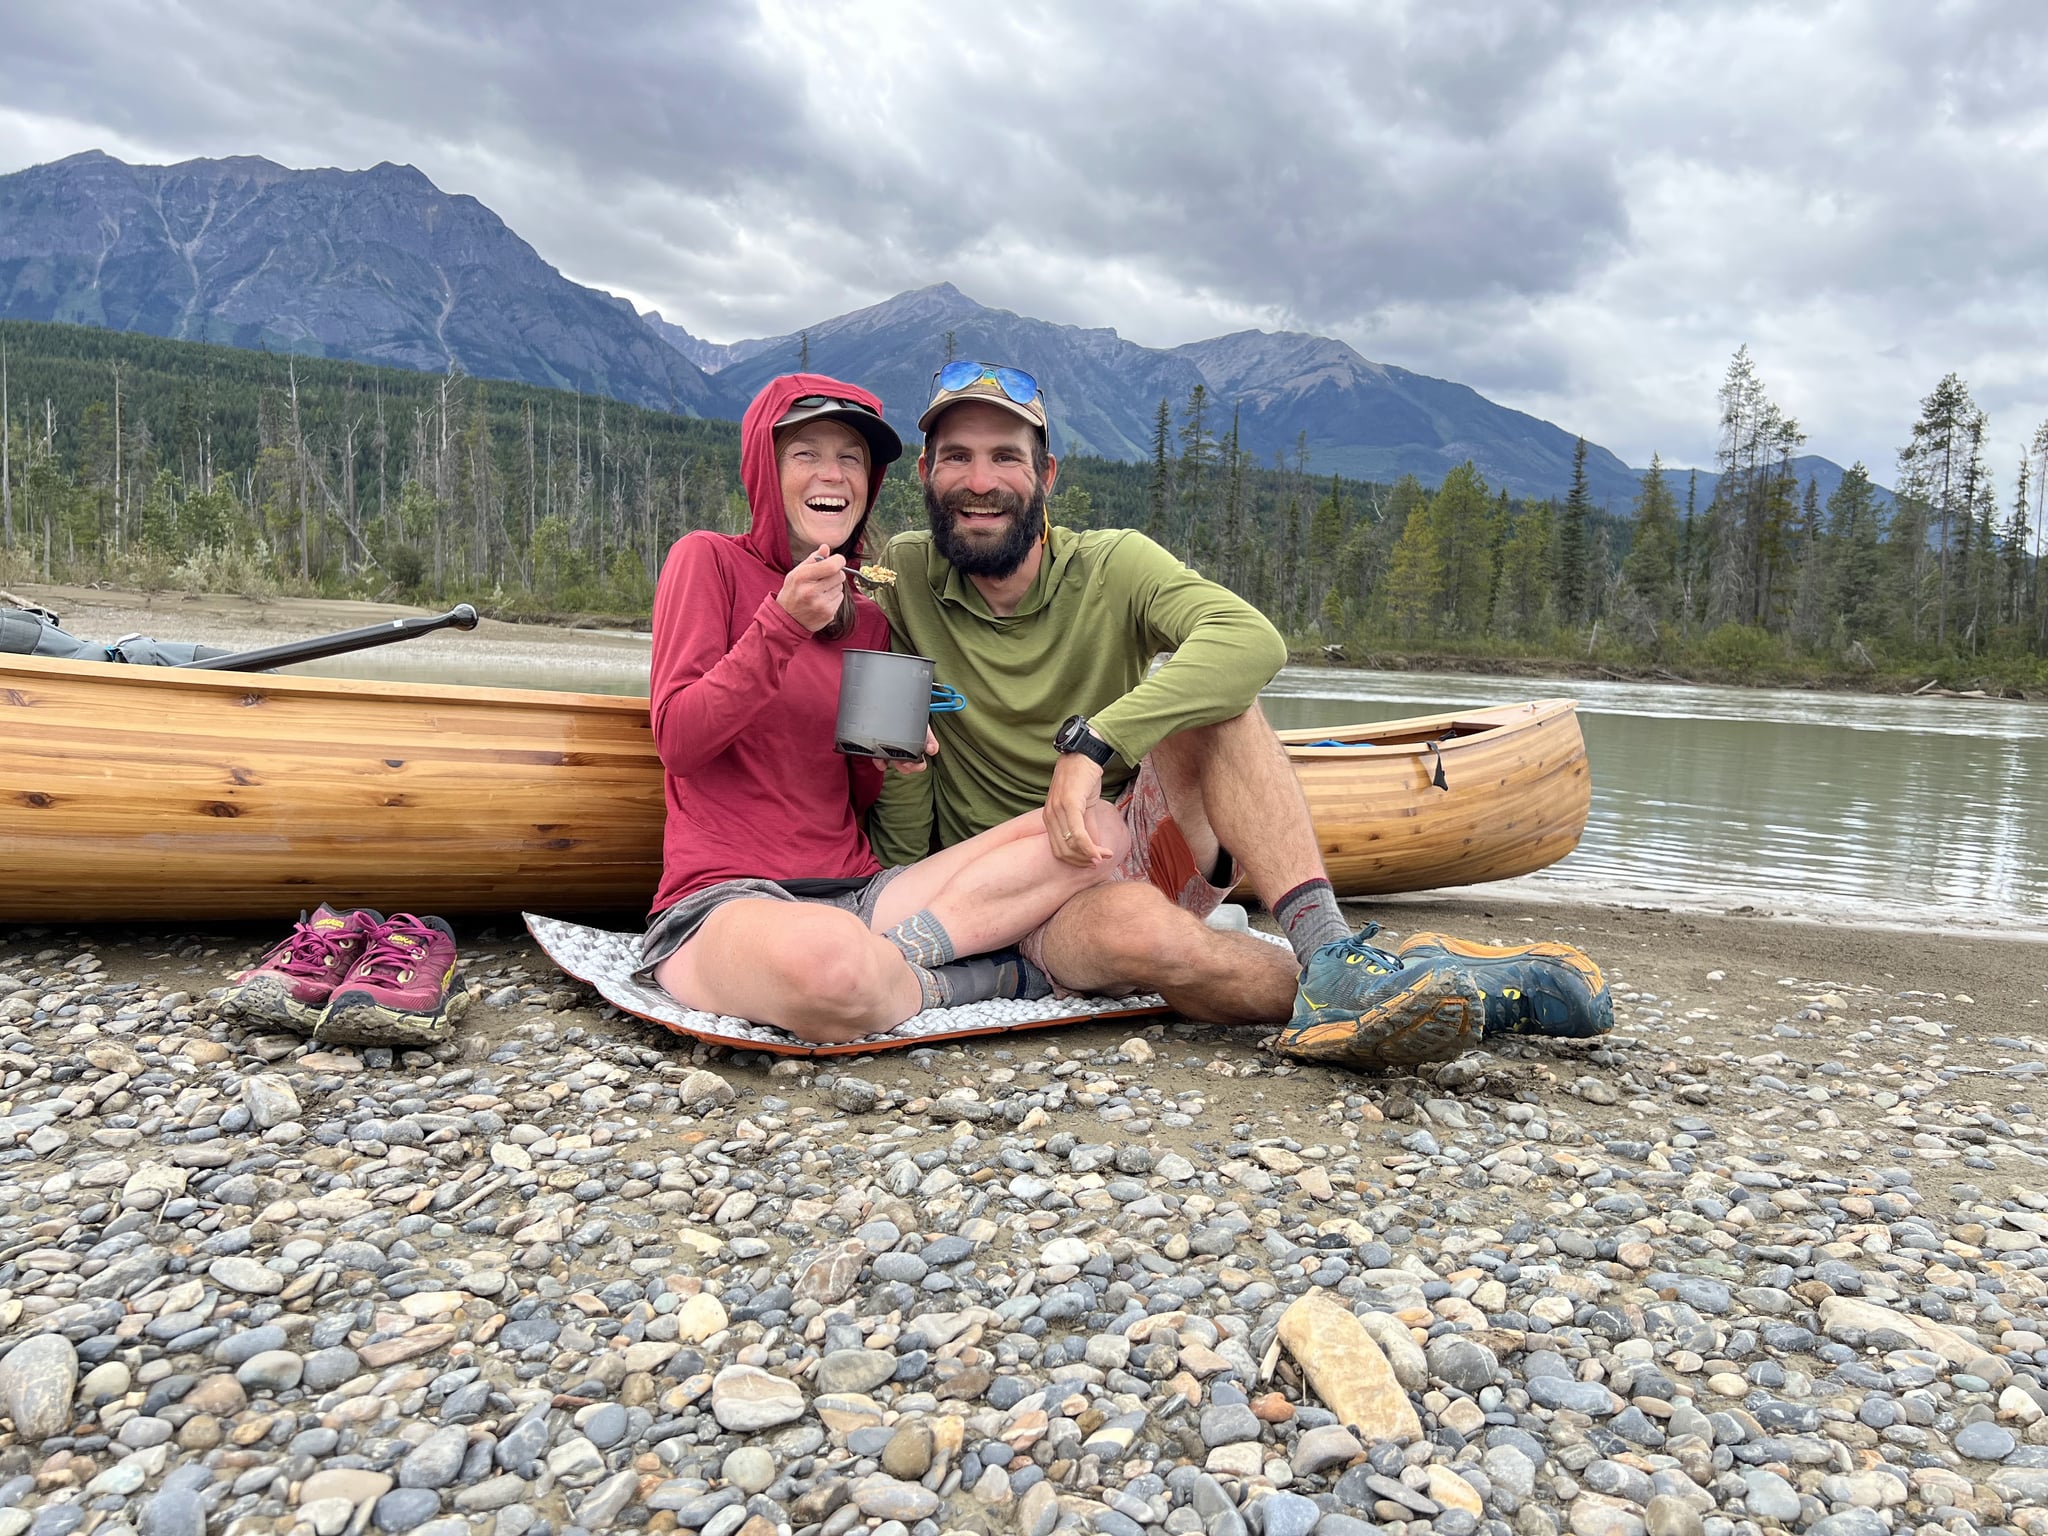 @ThruHikers Renee Miller and Tim Beissinger with their canoe on the Columbia River